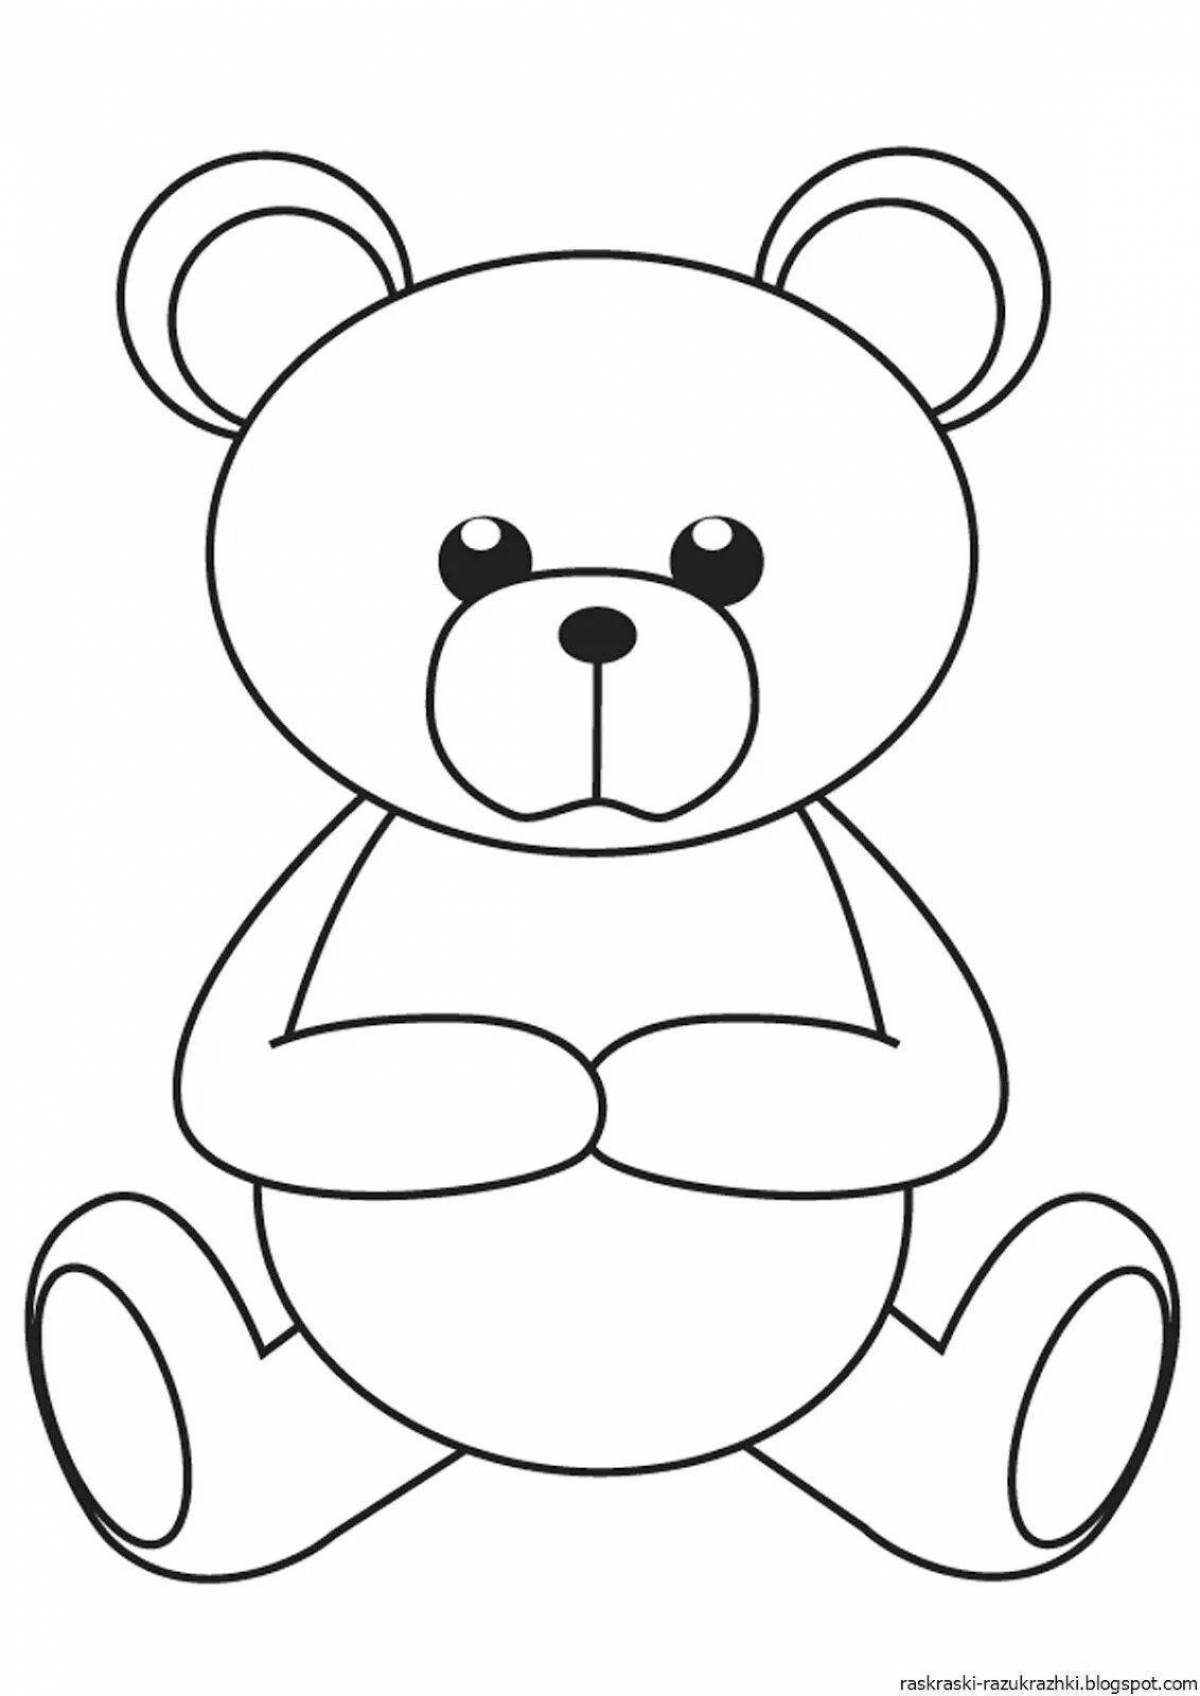 Unforgettable coloring bear for children 5-6 years old